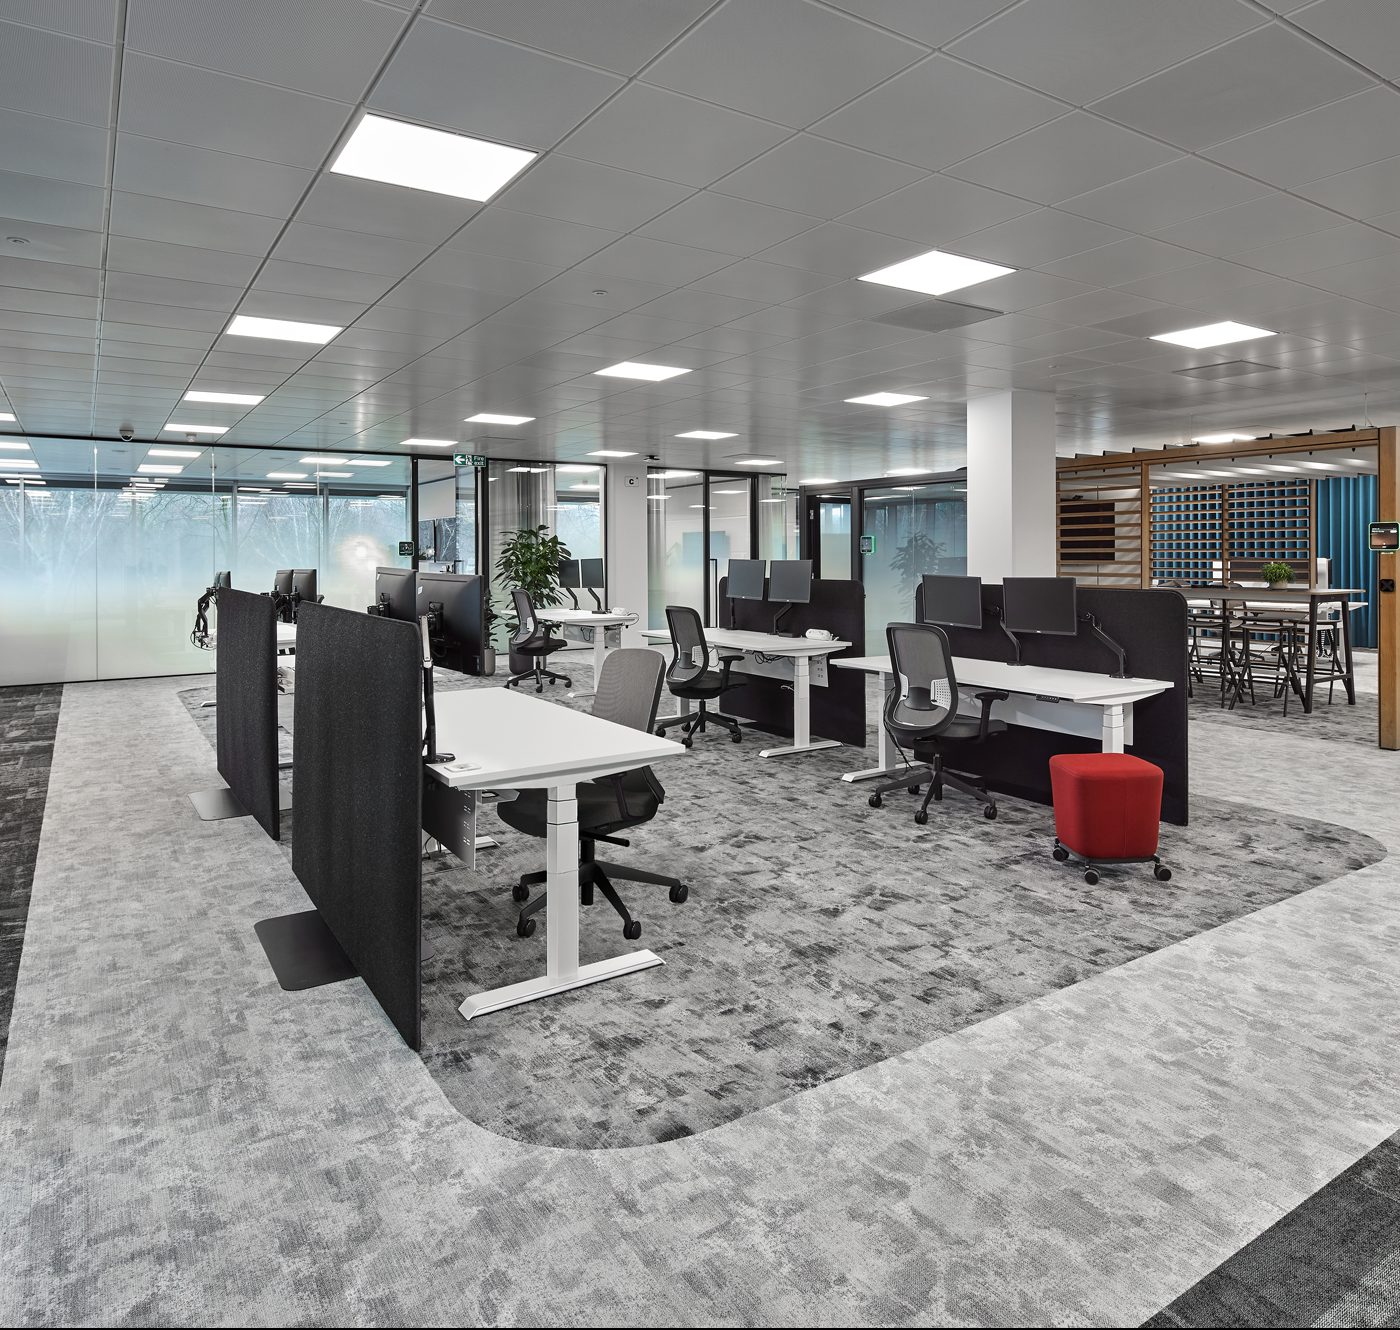 Skymod® Grid fittings featured in Bechtel's offices in Park Royal, London.